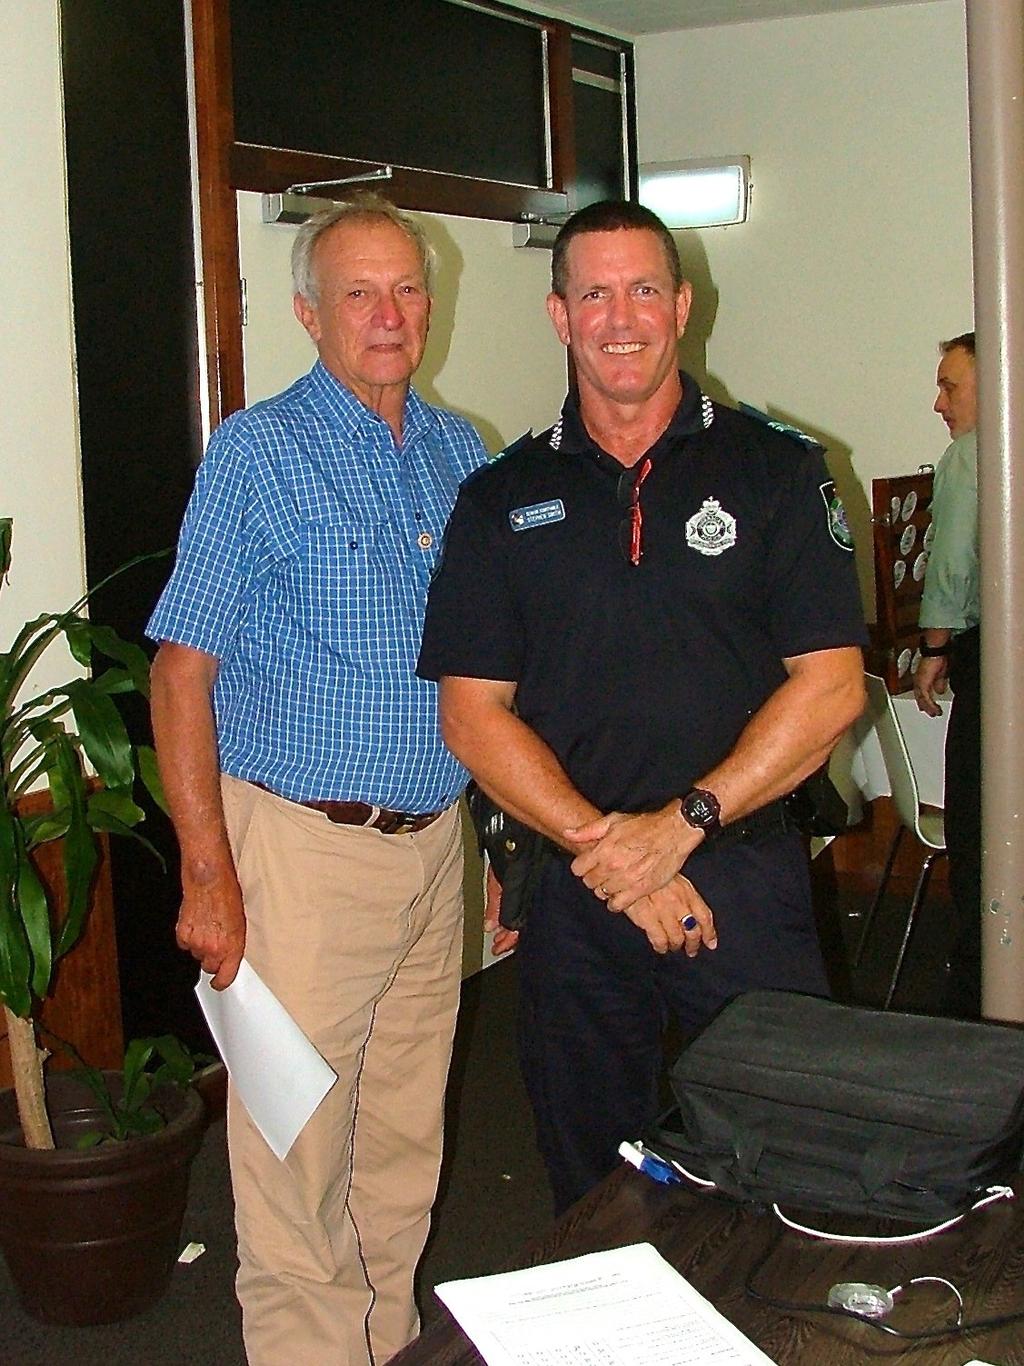 Issue 1 Wednesday, 31 August 2016 Senior Constable Steve Smith discussed the growing issues of